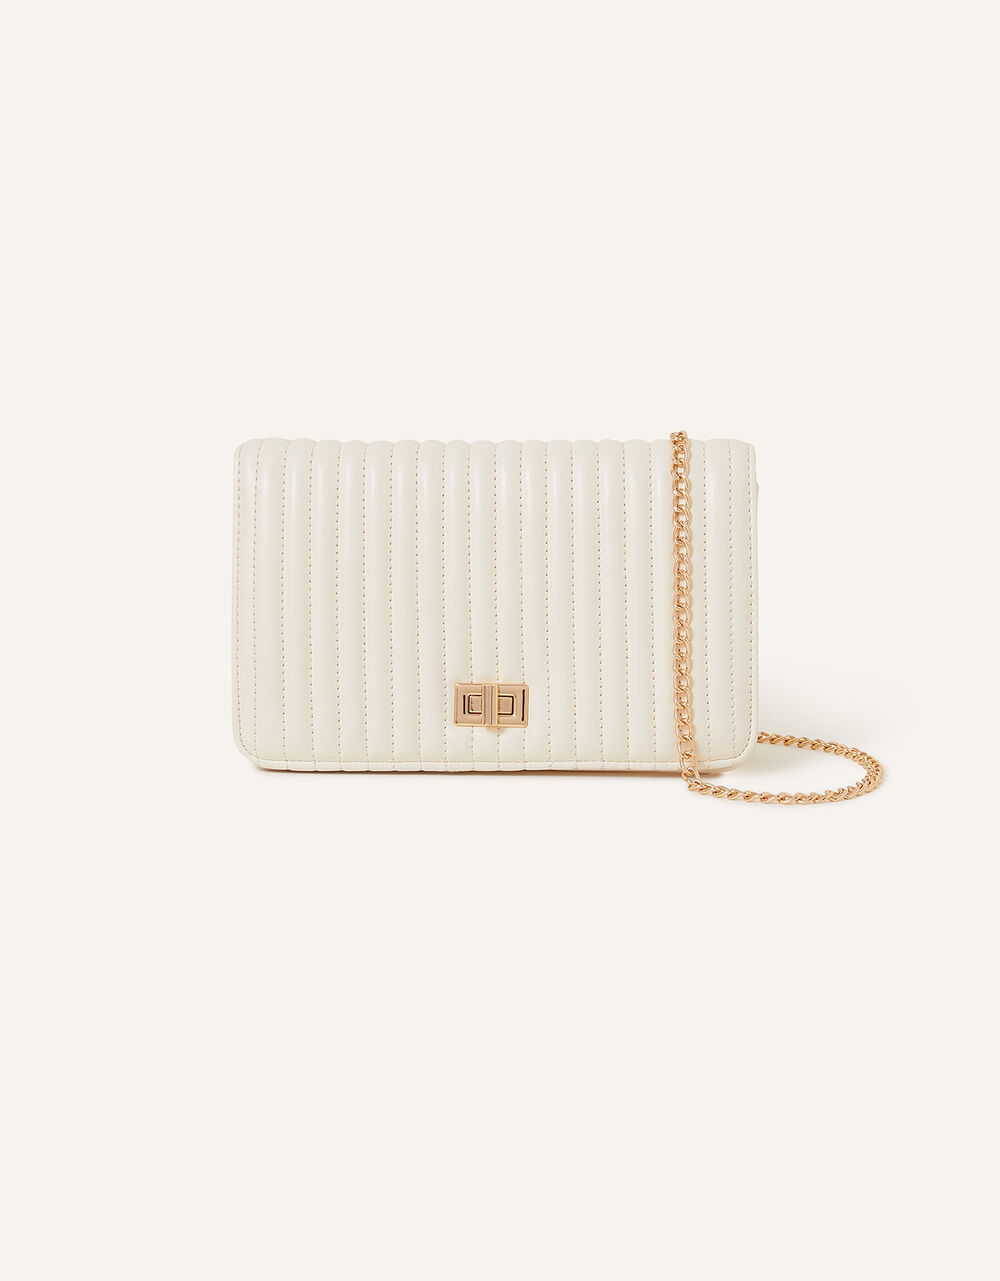 QUILTED CHAIN SHOULDER BAG CREAM